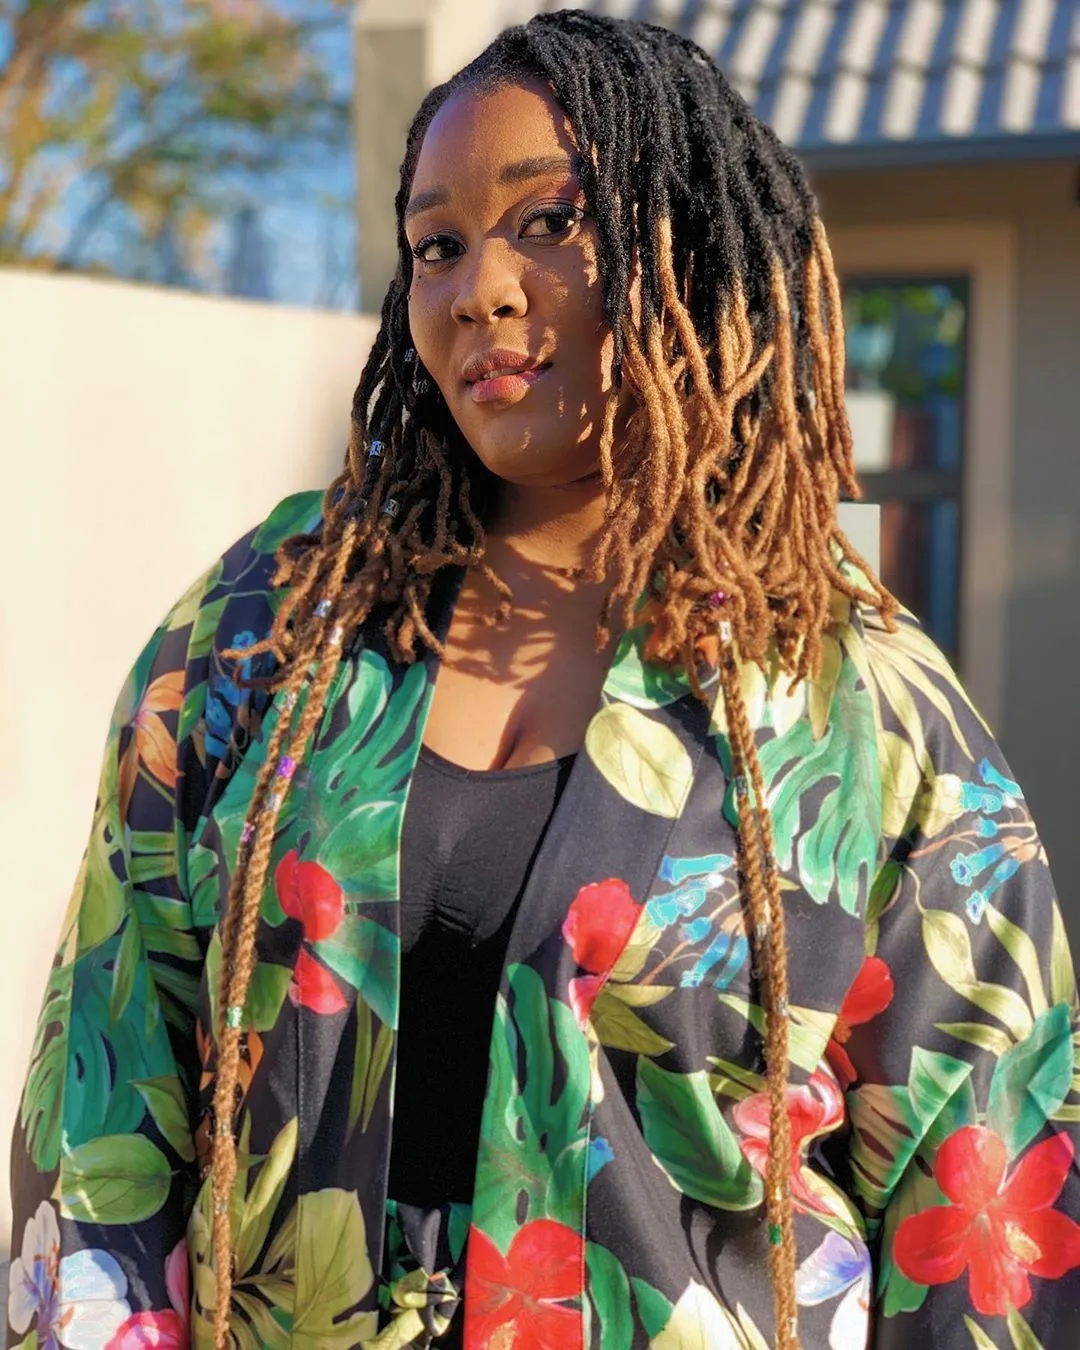 Lady Zamar reacts to the story of a 15-year-old who hanged himself after being accused of r@pe